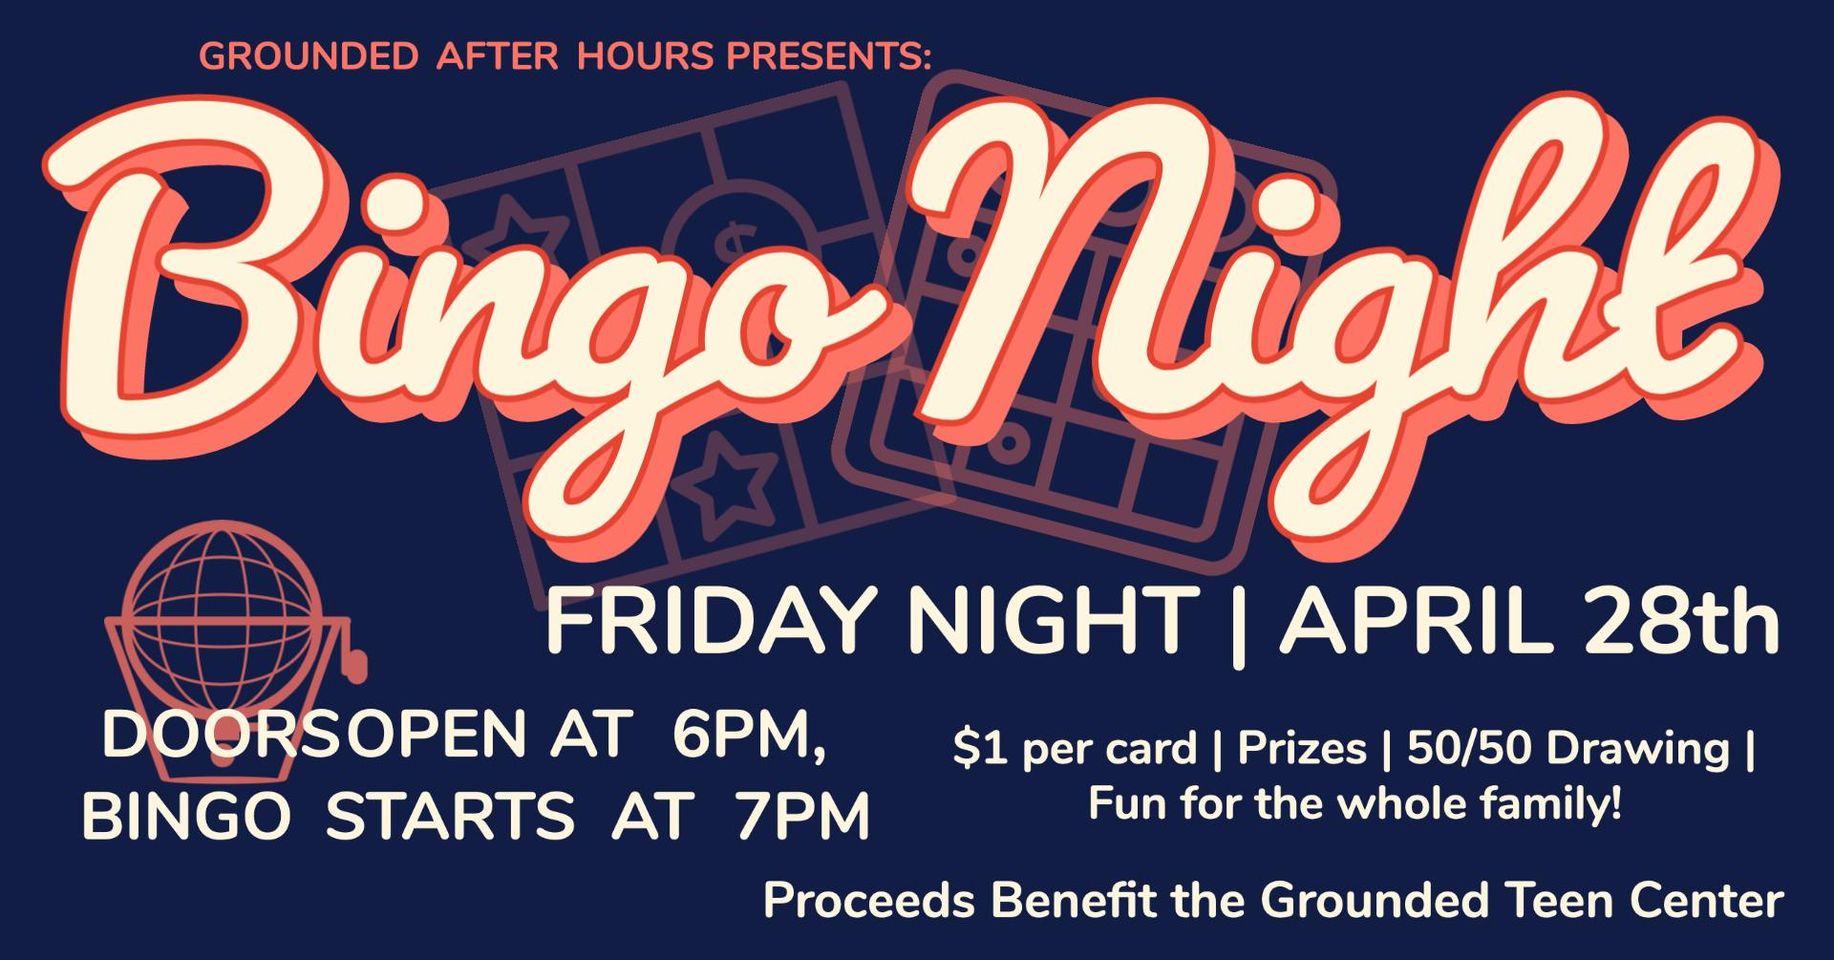 After Hours Bingo Night Party